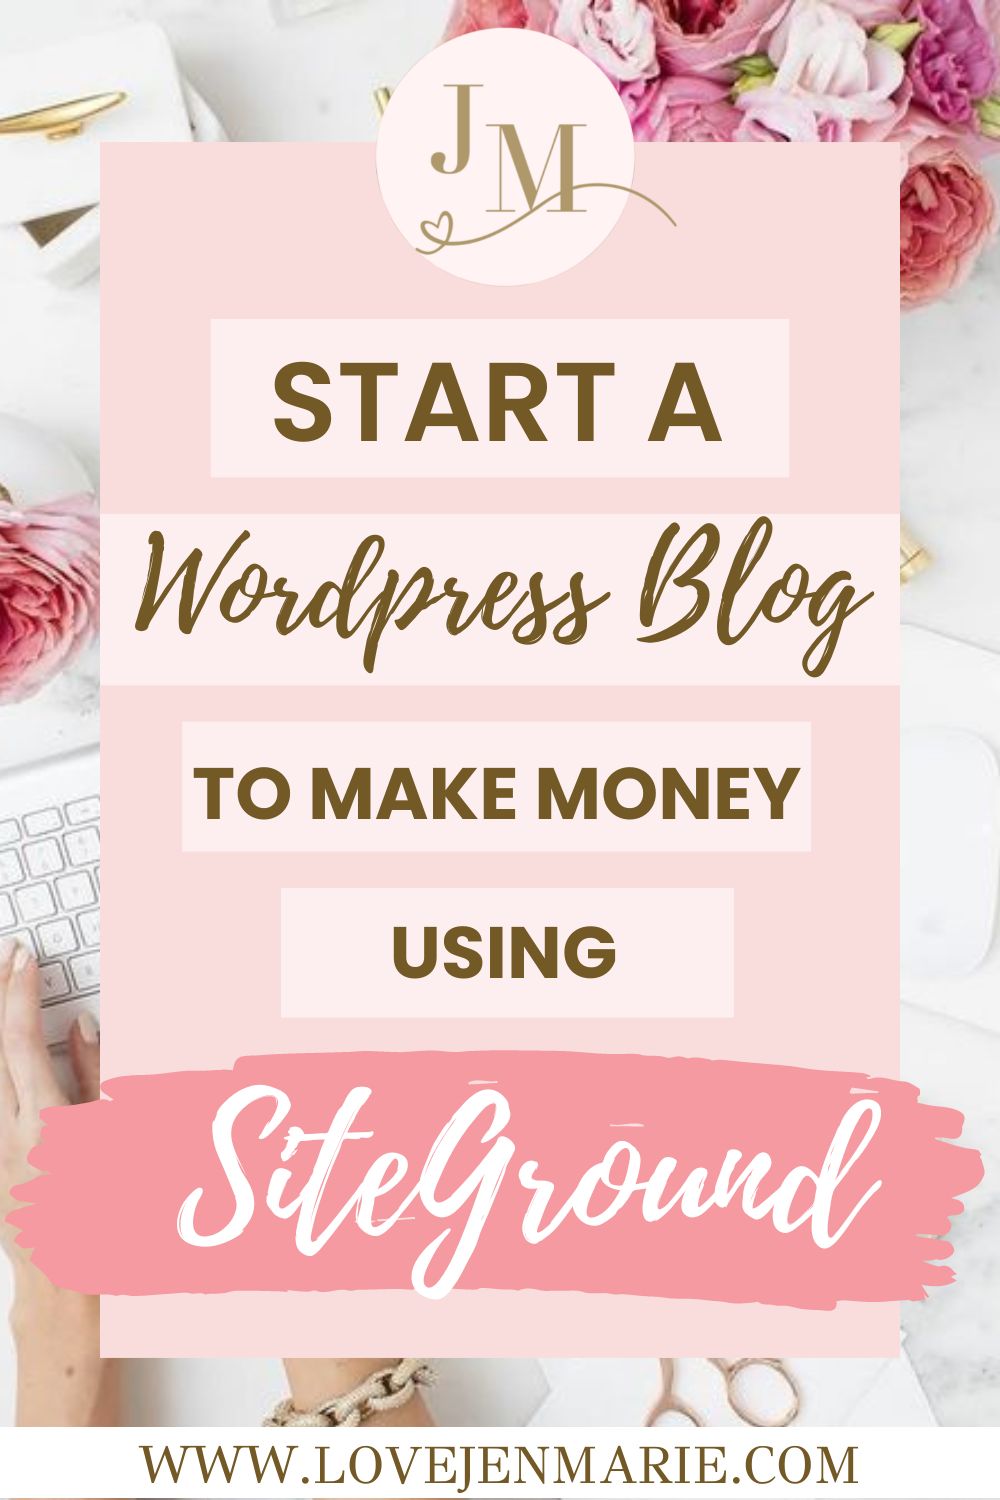 How to Start a Money Making Blog Using Siteground. How to self host your own blog, start a wordpress blog, how to make money online, wordpress for beginners, start a blog to make money 